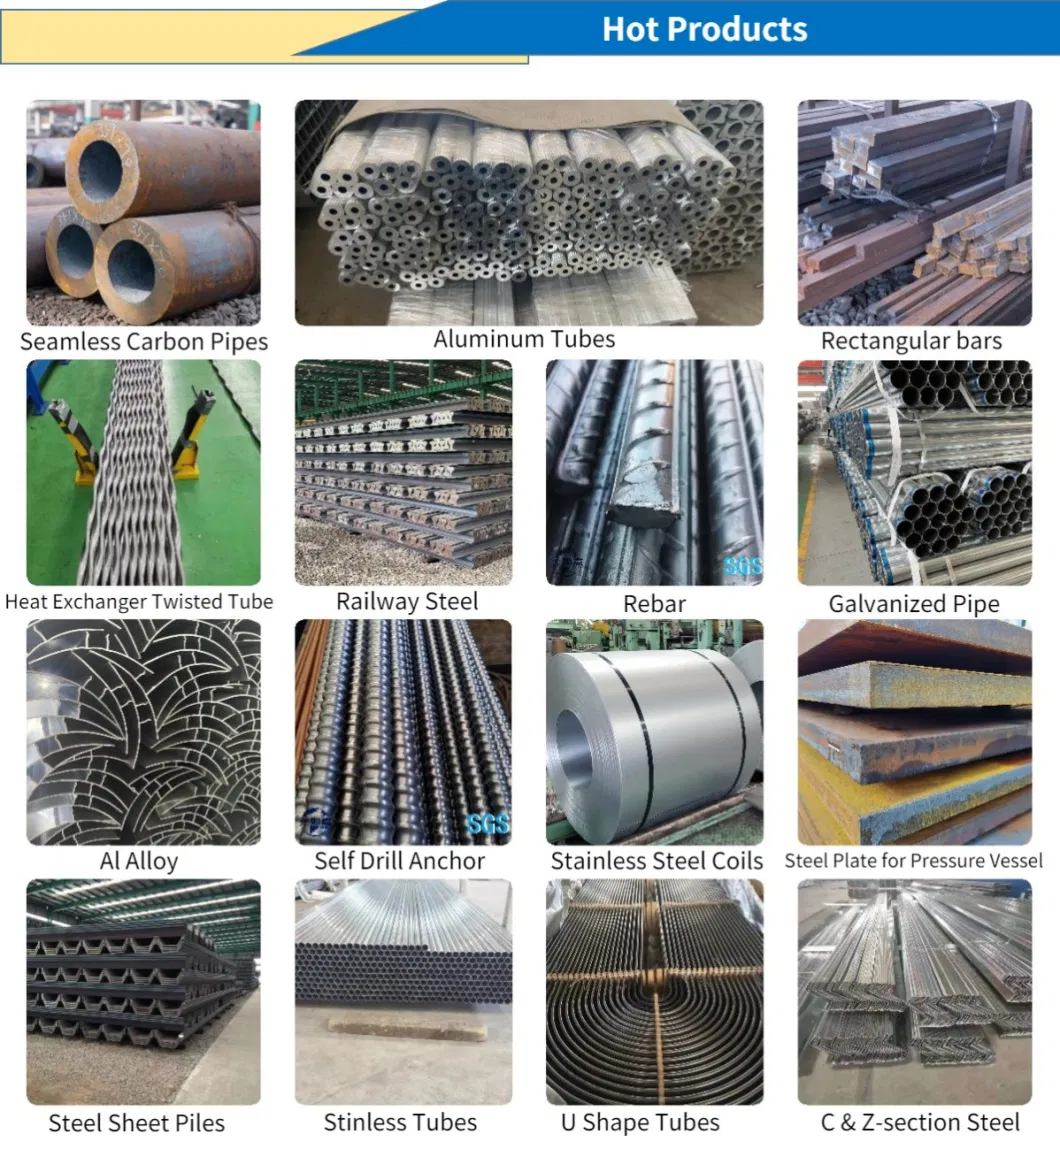 China Origin Carbon Steel Coil Plate Bar Pipe Fitting Flange Square Tube Round Bar Hollow Section Rod Bar Wir of GB, ISO, En, BS, DIN, ASTM, ASME, API Standards